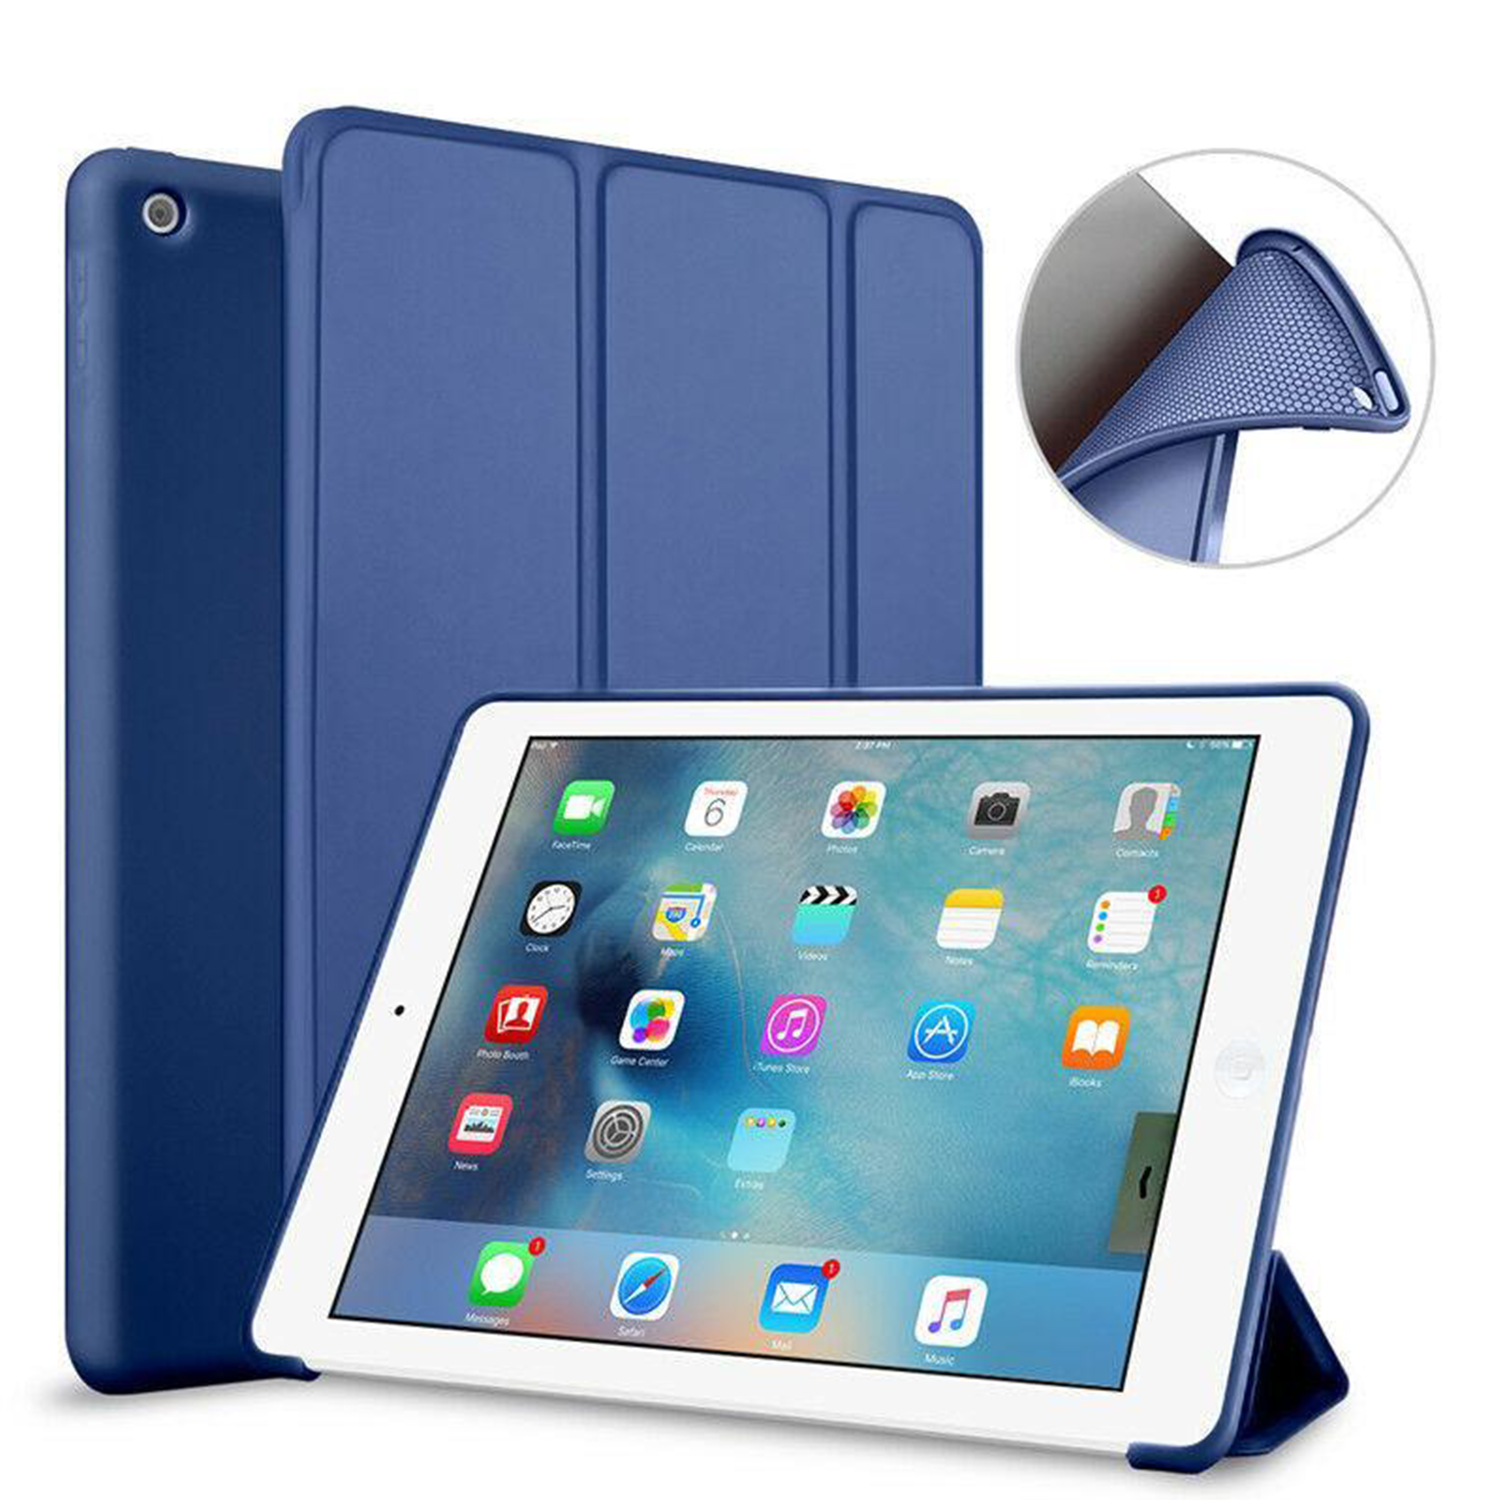 IPad 5th Generation Smart Cover Stand iPad Case